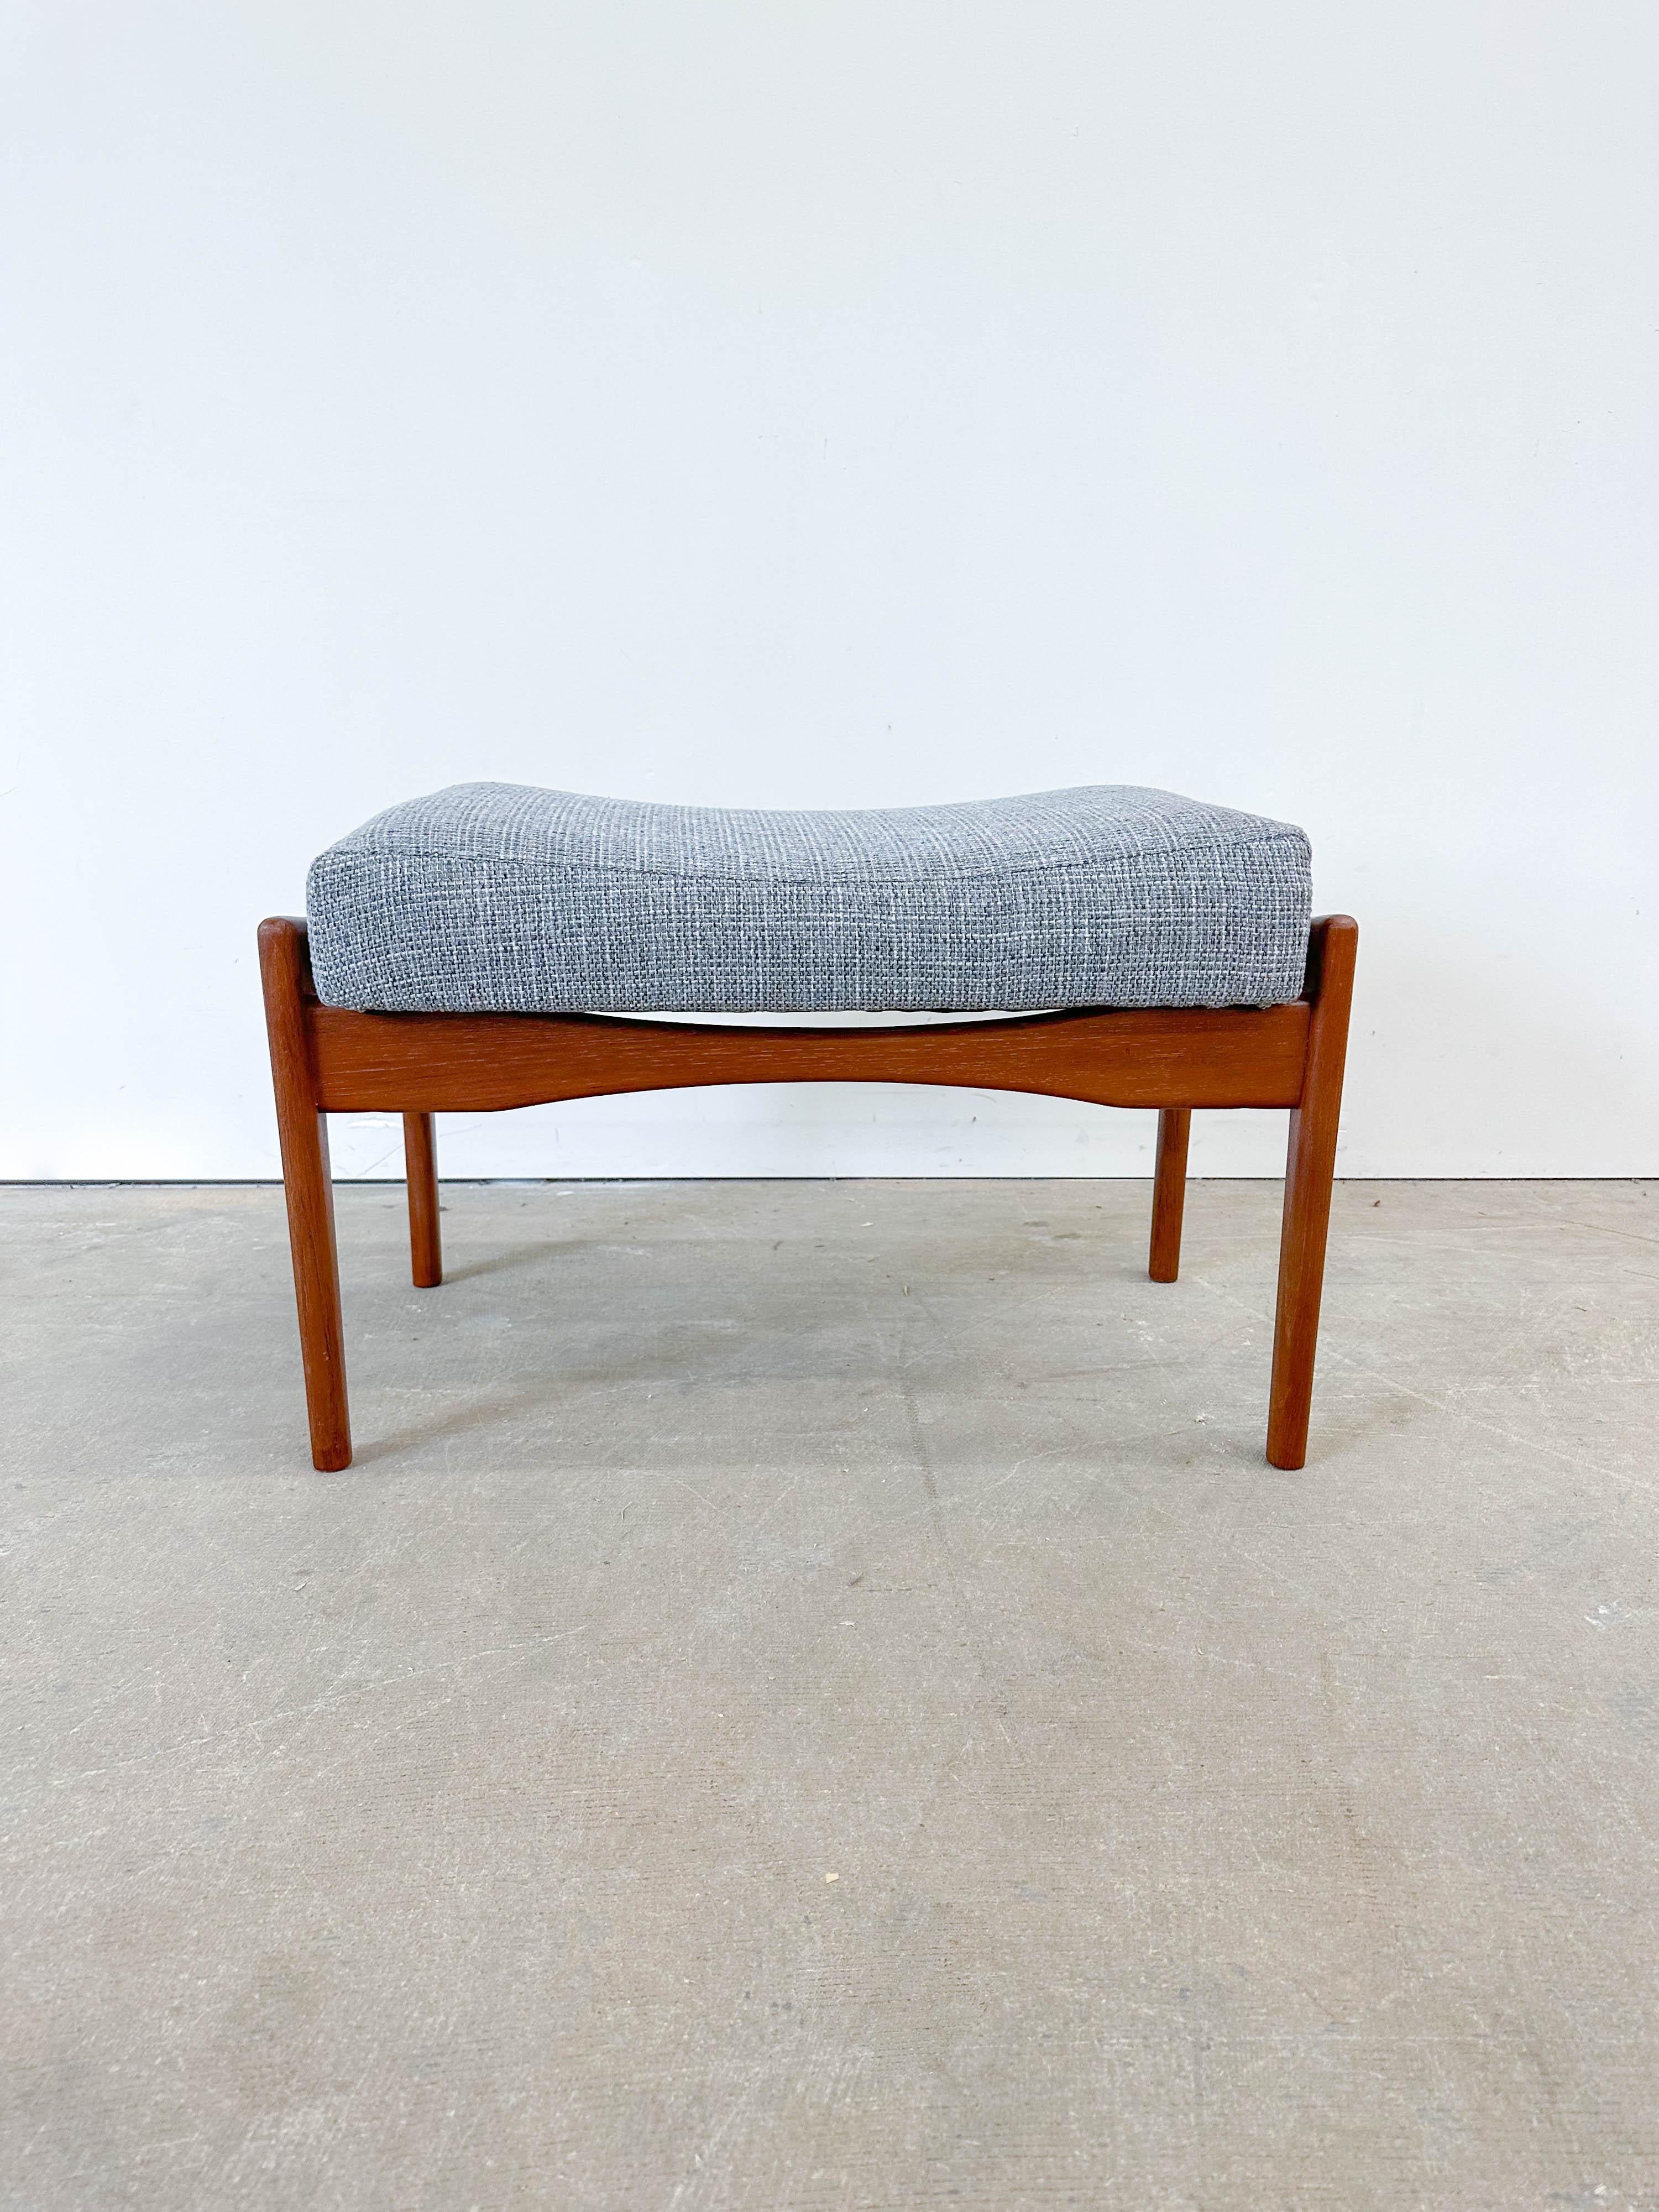 Large ottoman or stool designed by In Kofod Larsen for OPE of Sweden in the 1960s. Solid teak frame with newly reupholstered seat cushion. Nicely tapered stretchers give the cushion the illusion of floating.
